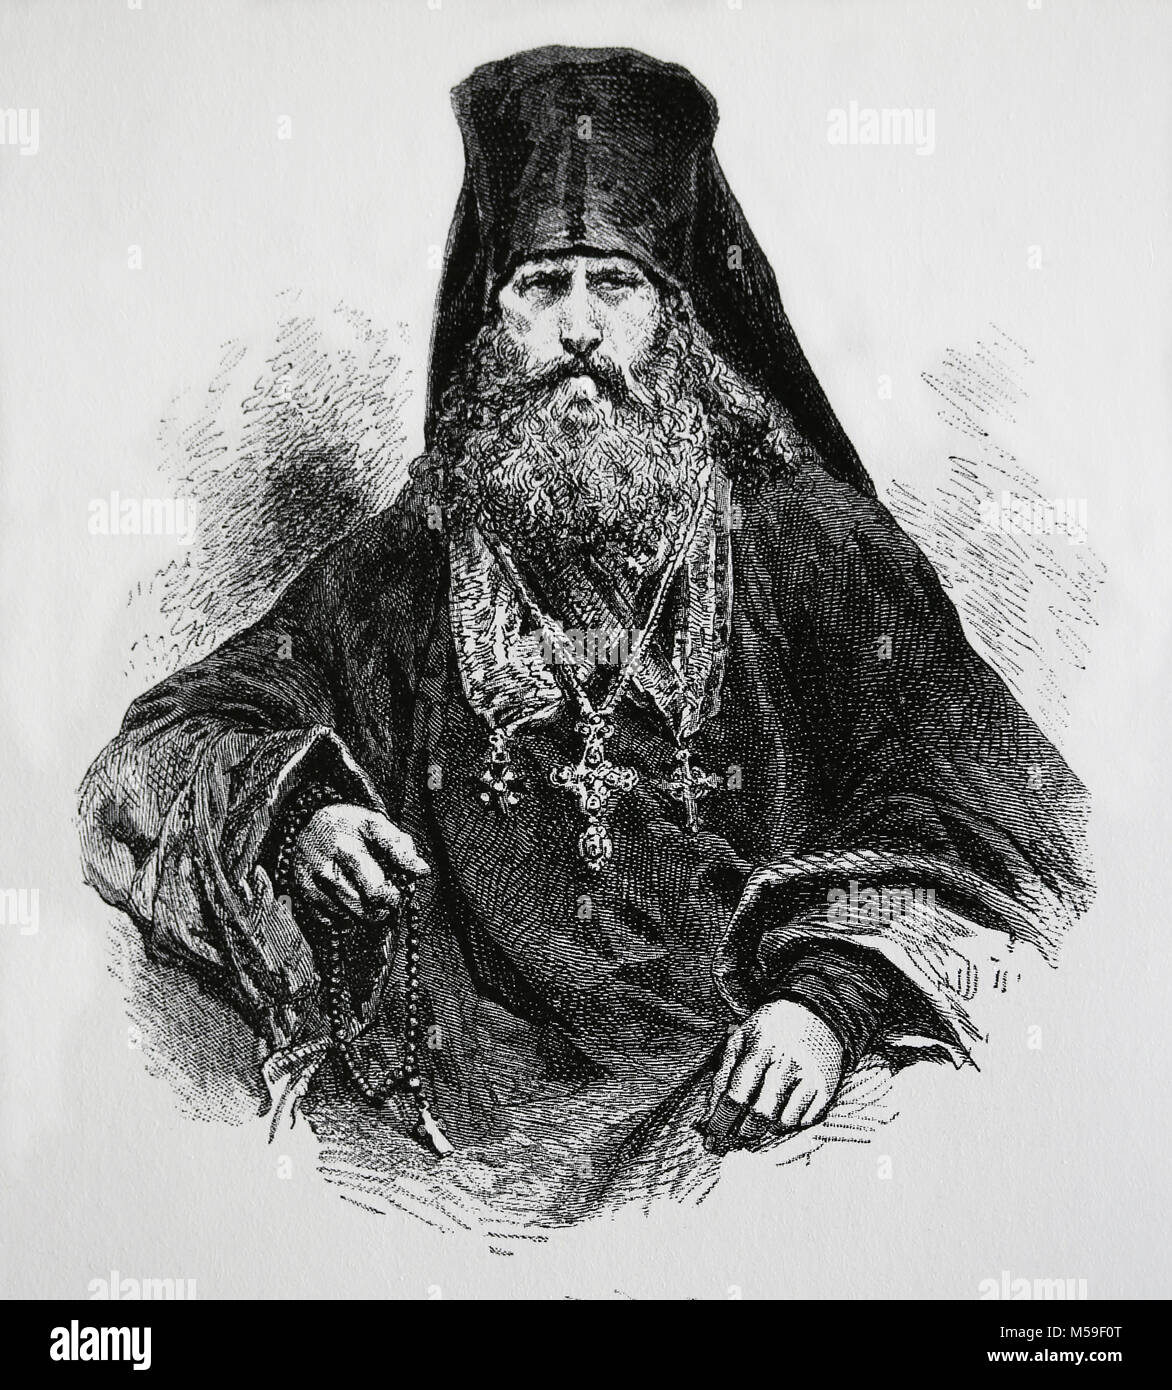 Russian Orthodox cleric. 1870. Engraving. Stock Photo